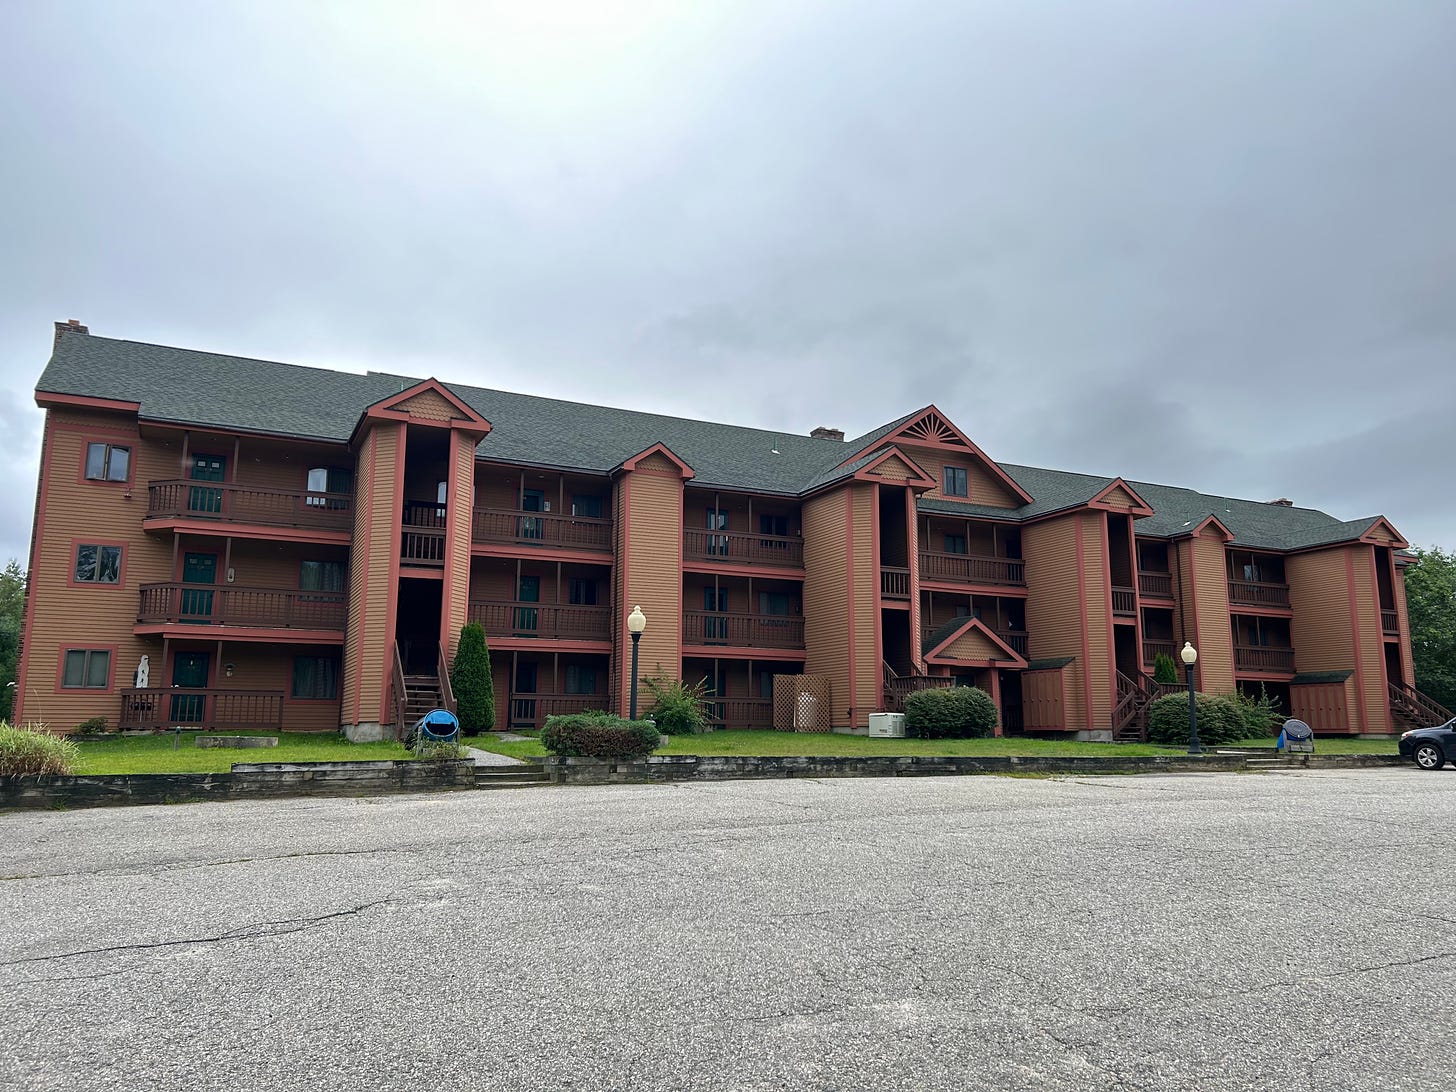 Photo of large three-level condo with brown walls and red trim, no cars in the parking lot, three stairways, overcast skies